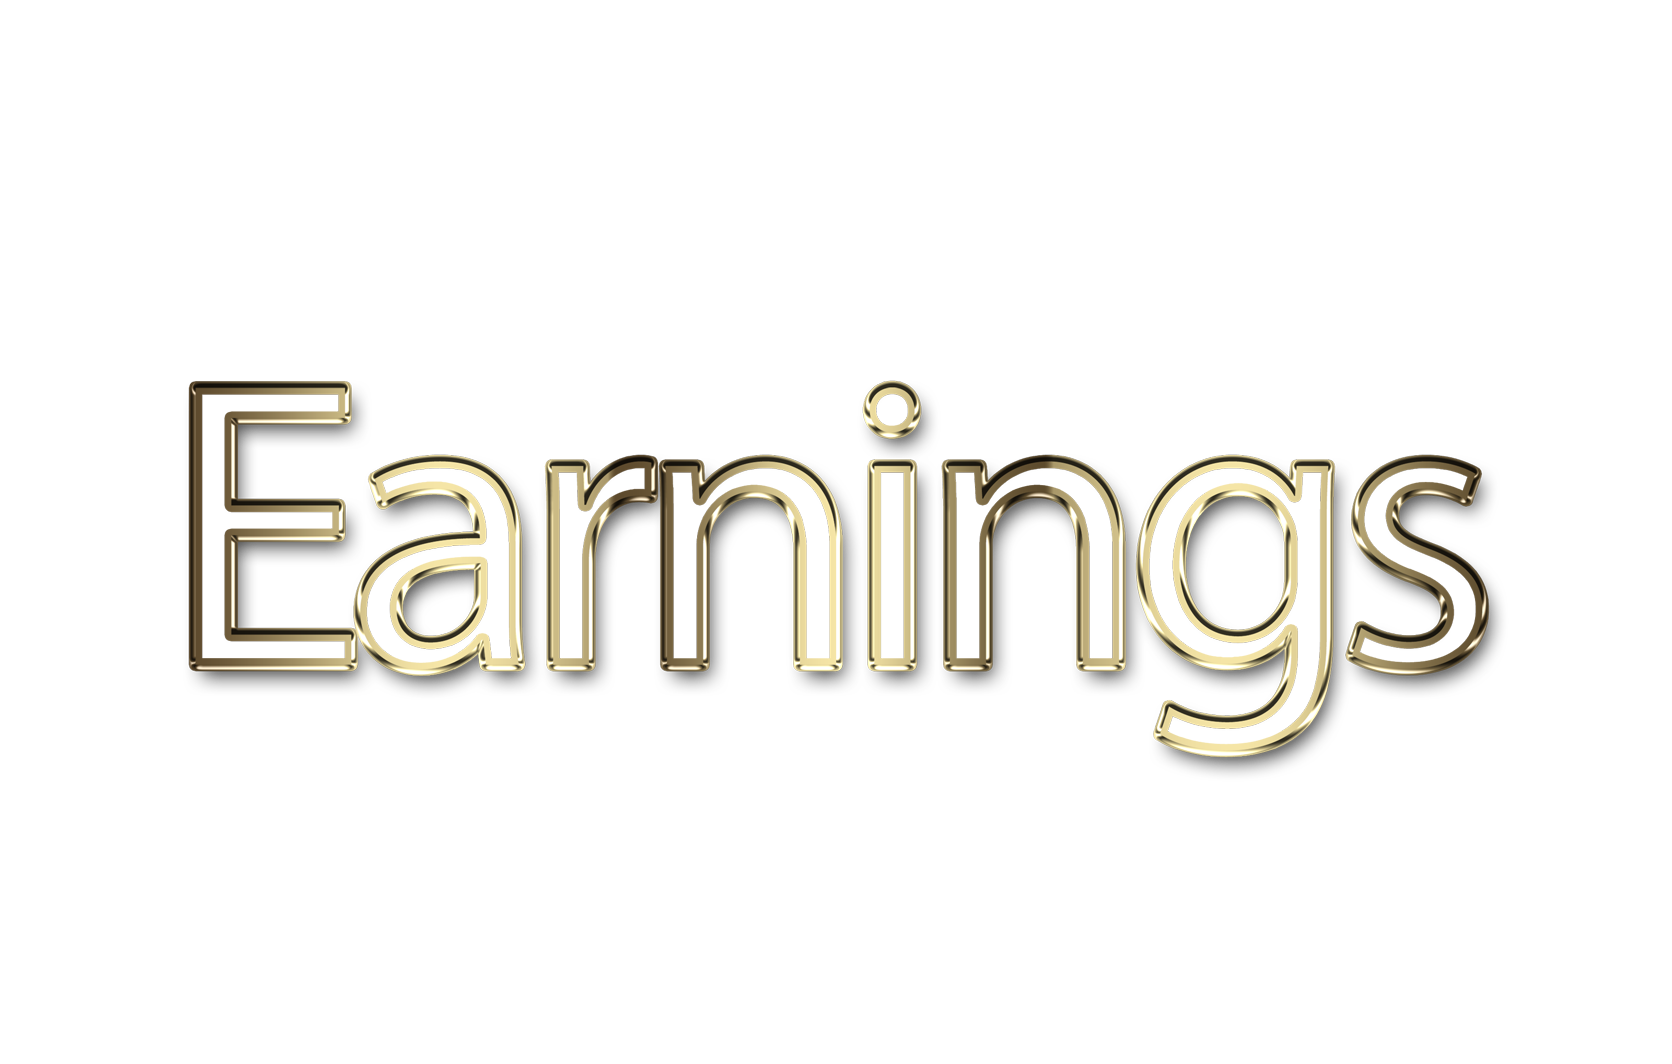 Earnings png, word Earnings png, Earnings word png, Earnings text png, Earnings letters png, Earnings word art typography PNG images, transparent png